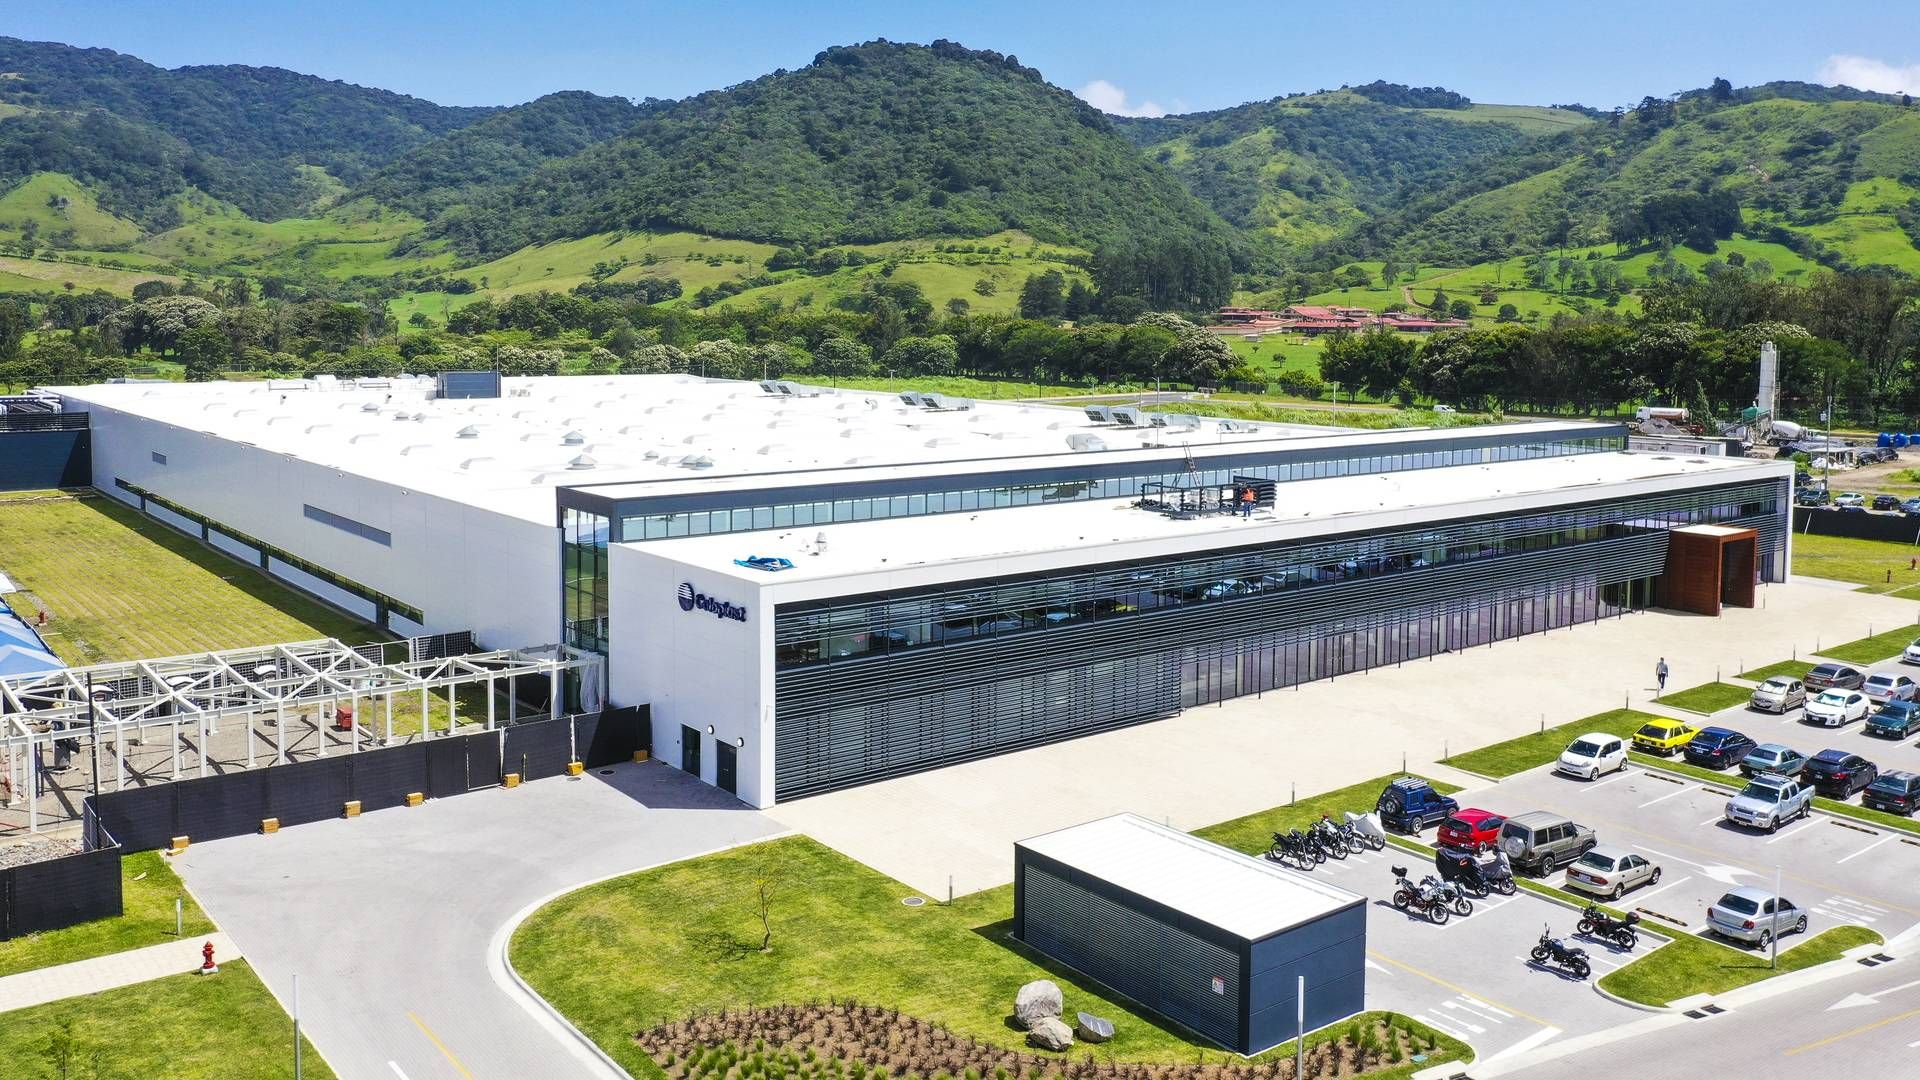 Coloplast has acquired a lush area of 100,000 square meters in Costa Rica, designated for two new large factories, around 20,000 square meters each. The Danish medtech company has injected around half a billion kroner (USD 76.2m) into the project so far, but tax payments in the country are nonetheless kept a secret | Photo: Coloplast/PR